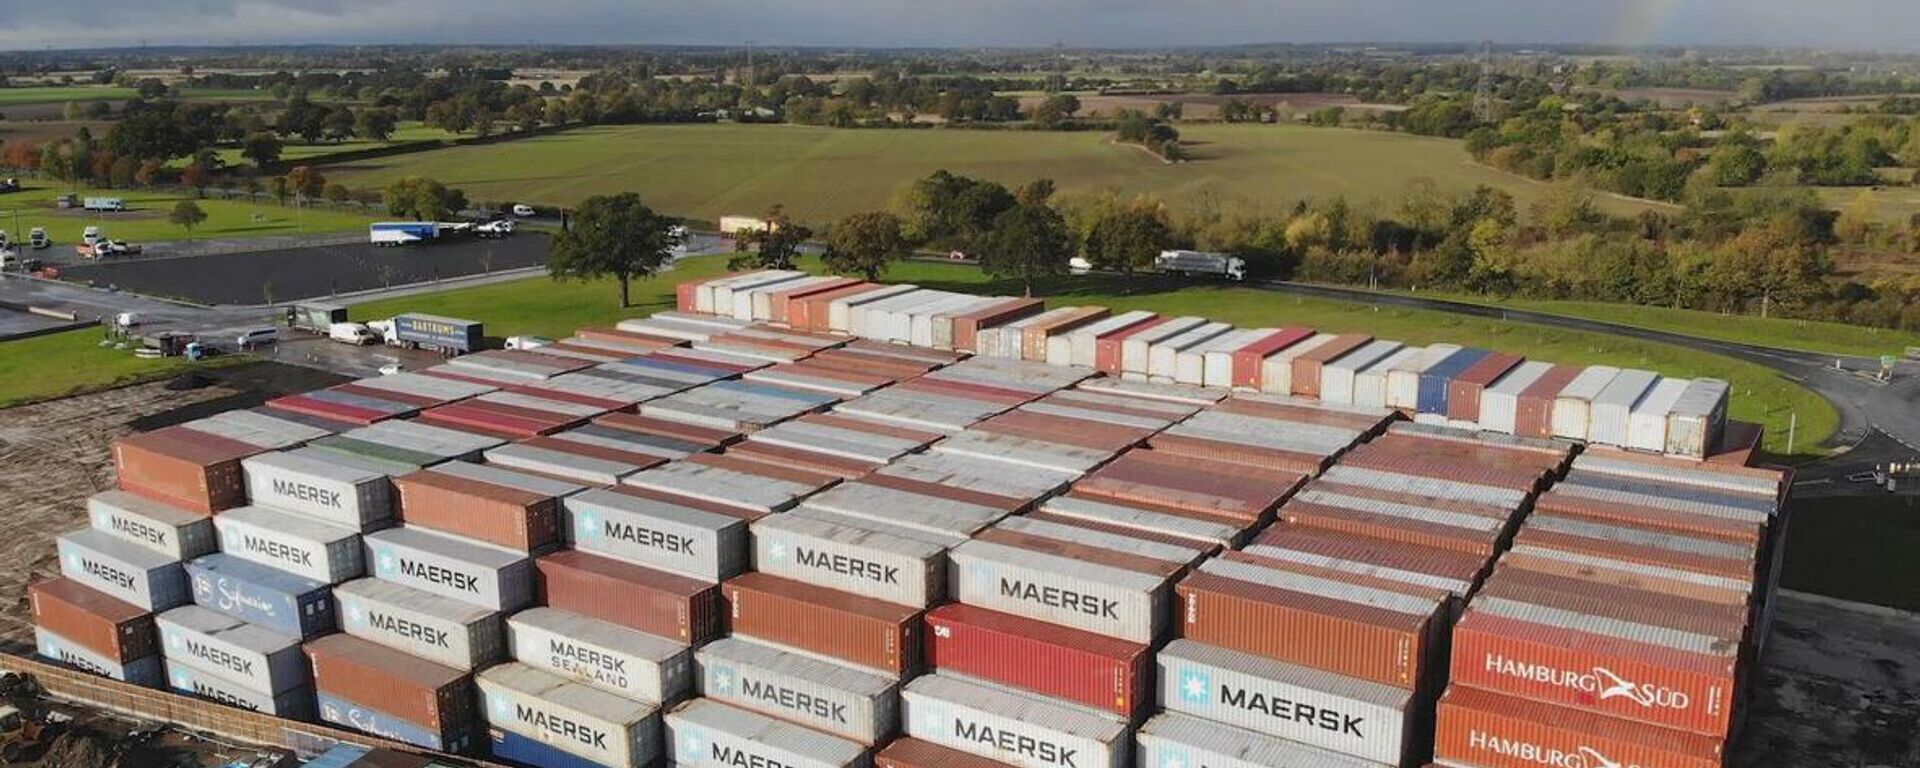 UK: Mountain of shipping containers left at Suffolk former airfield as supply chain crisis continues - Sputnik Moldova-România, 1920, 07.11.2021